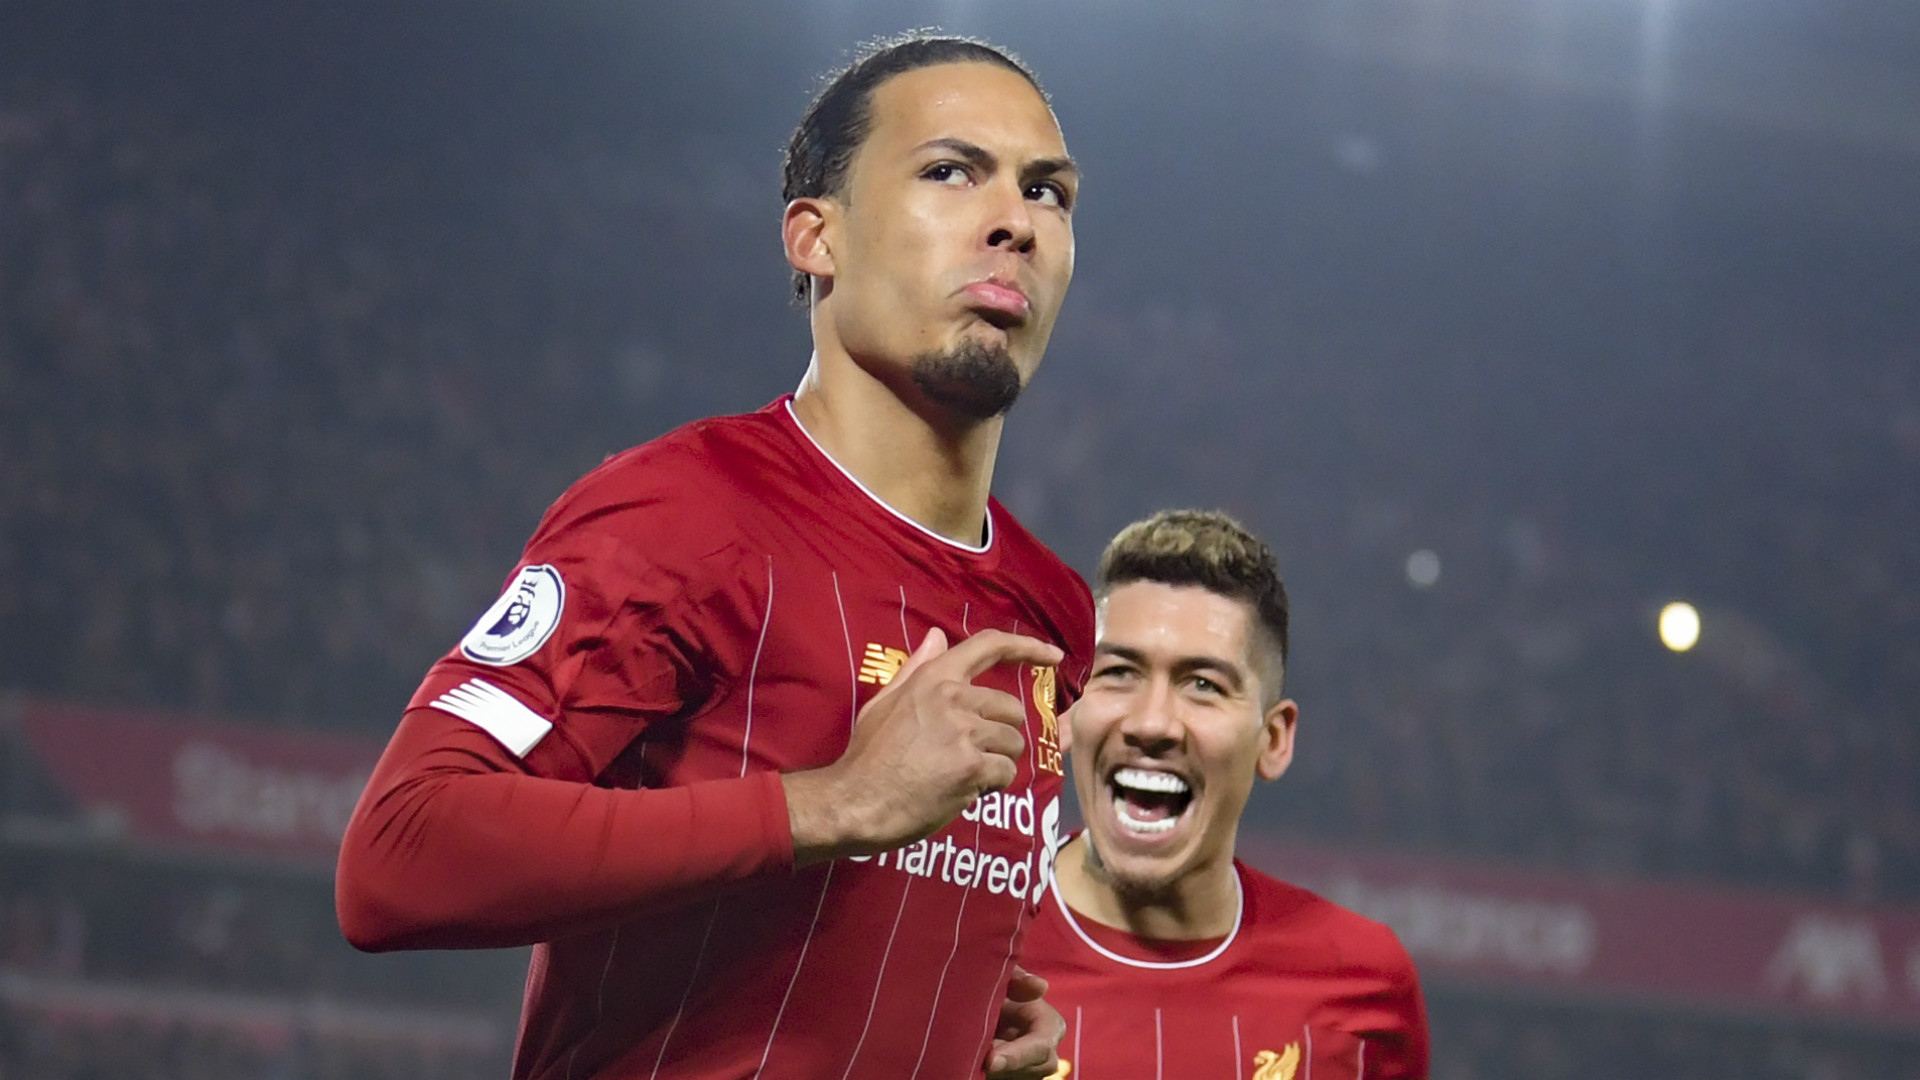 ‘Van Dijk could beat up anybody, including Drogba’ – Liverpool legend Nicol rejects Ballack’s ‘lucky’ claim